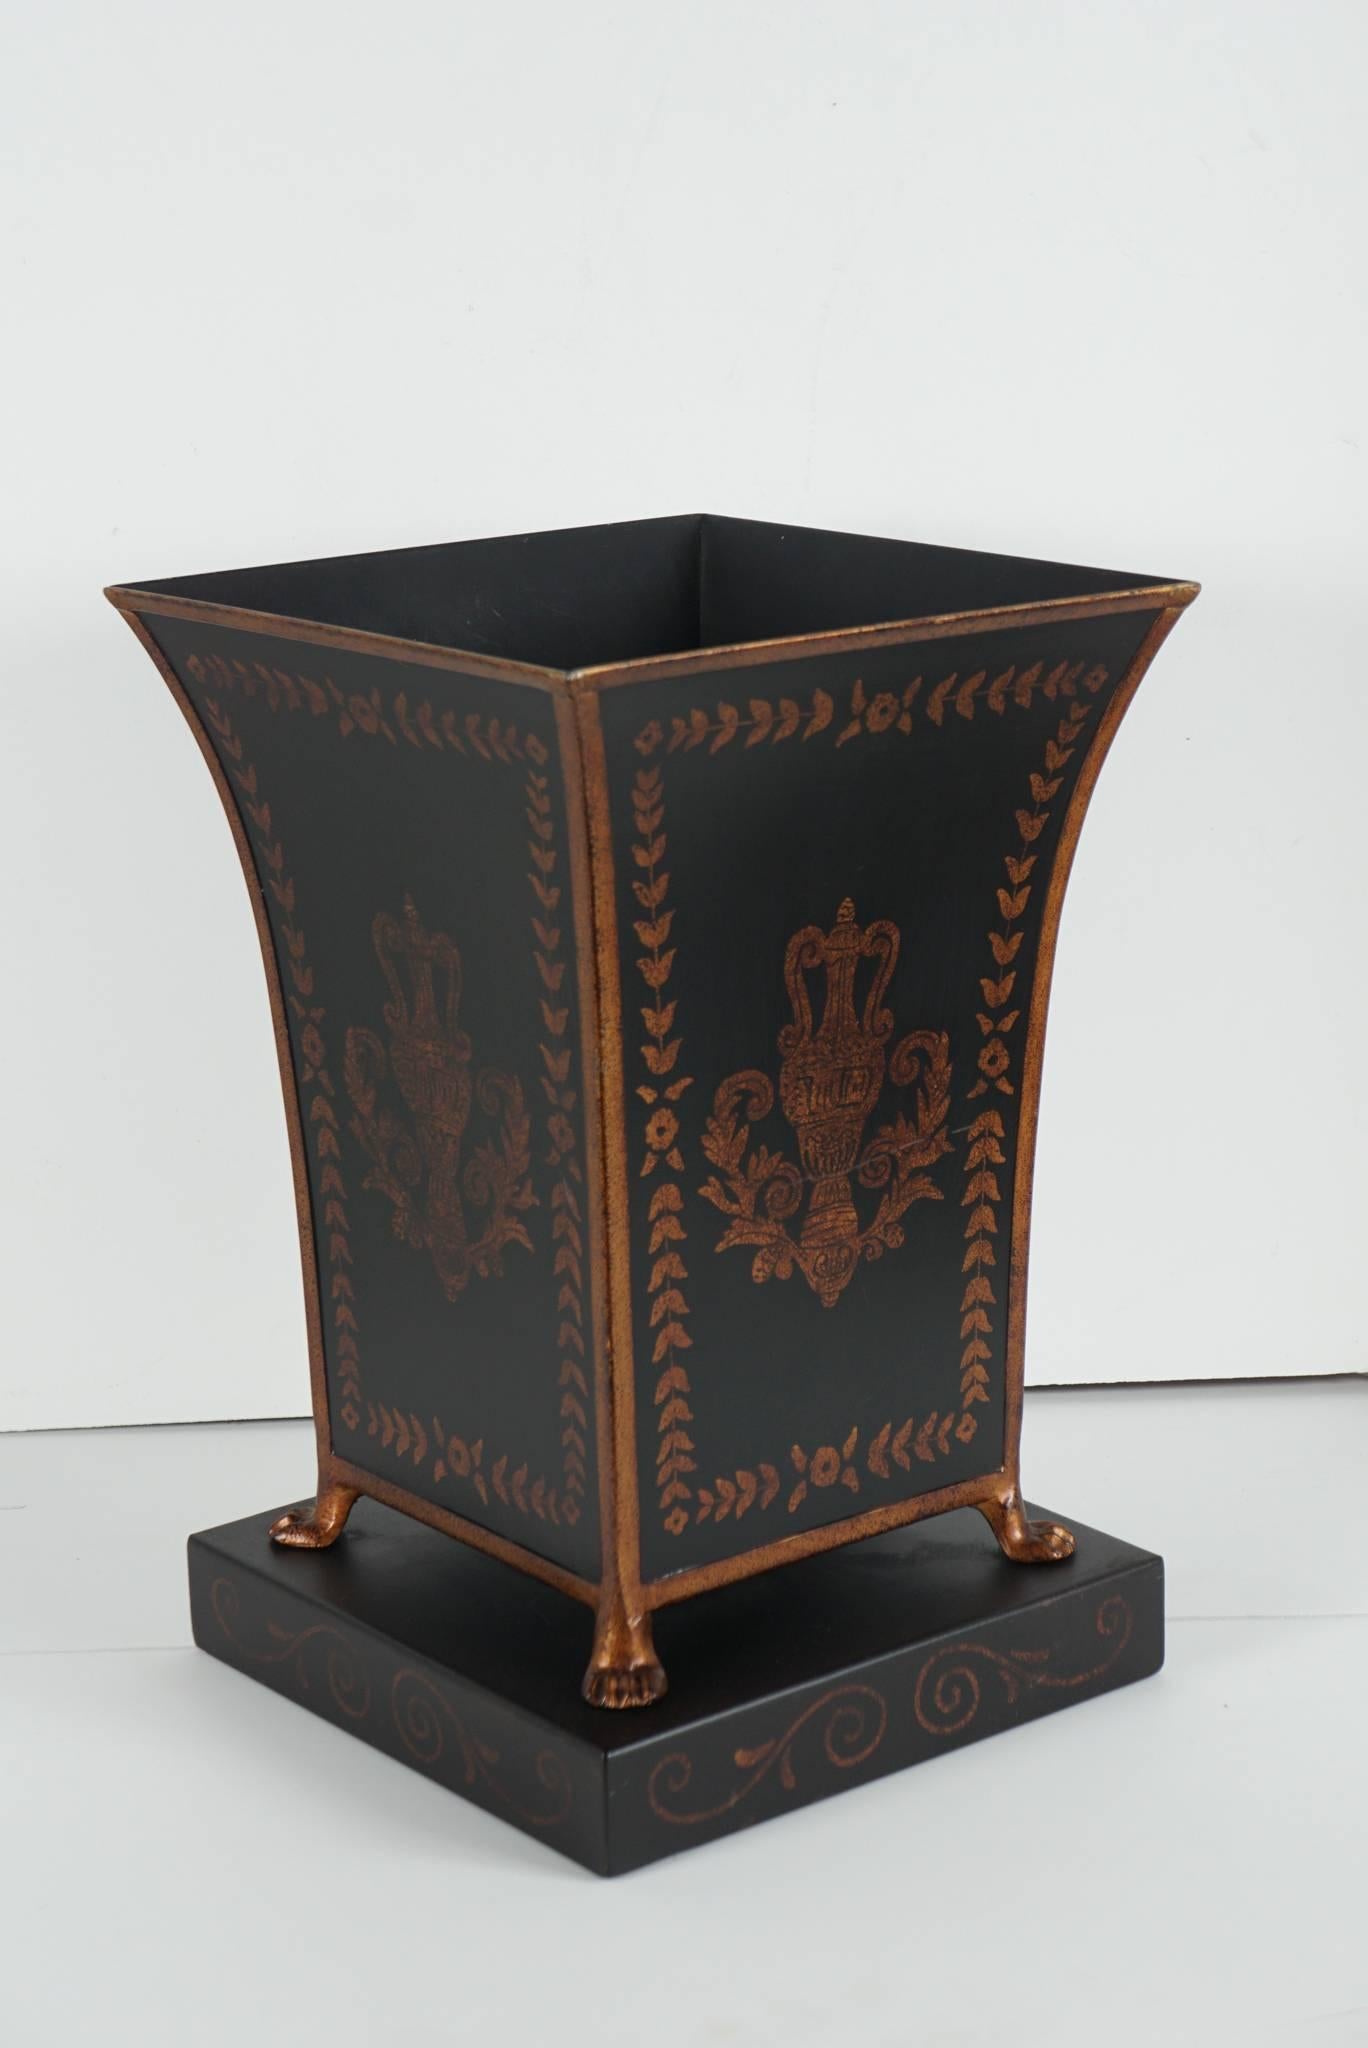 These two different objects were used as waste paper baskets by the Mellons in their home Oak Spring Farms. One is a tole large flower vase on base and is painted in black with tortoiseshell gilded decorations of medallions and leaf borders similar